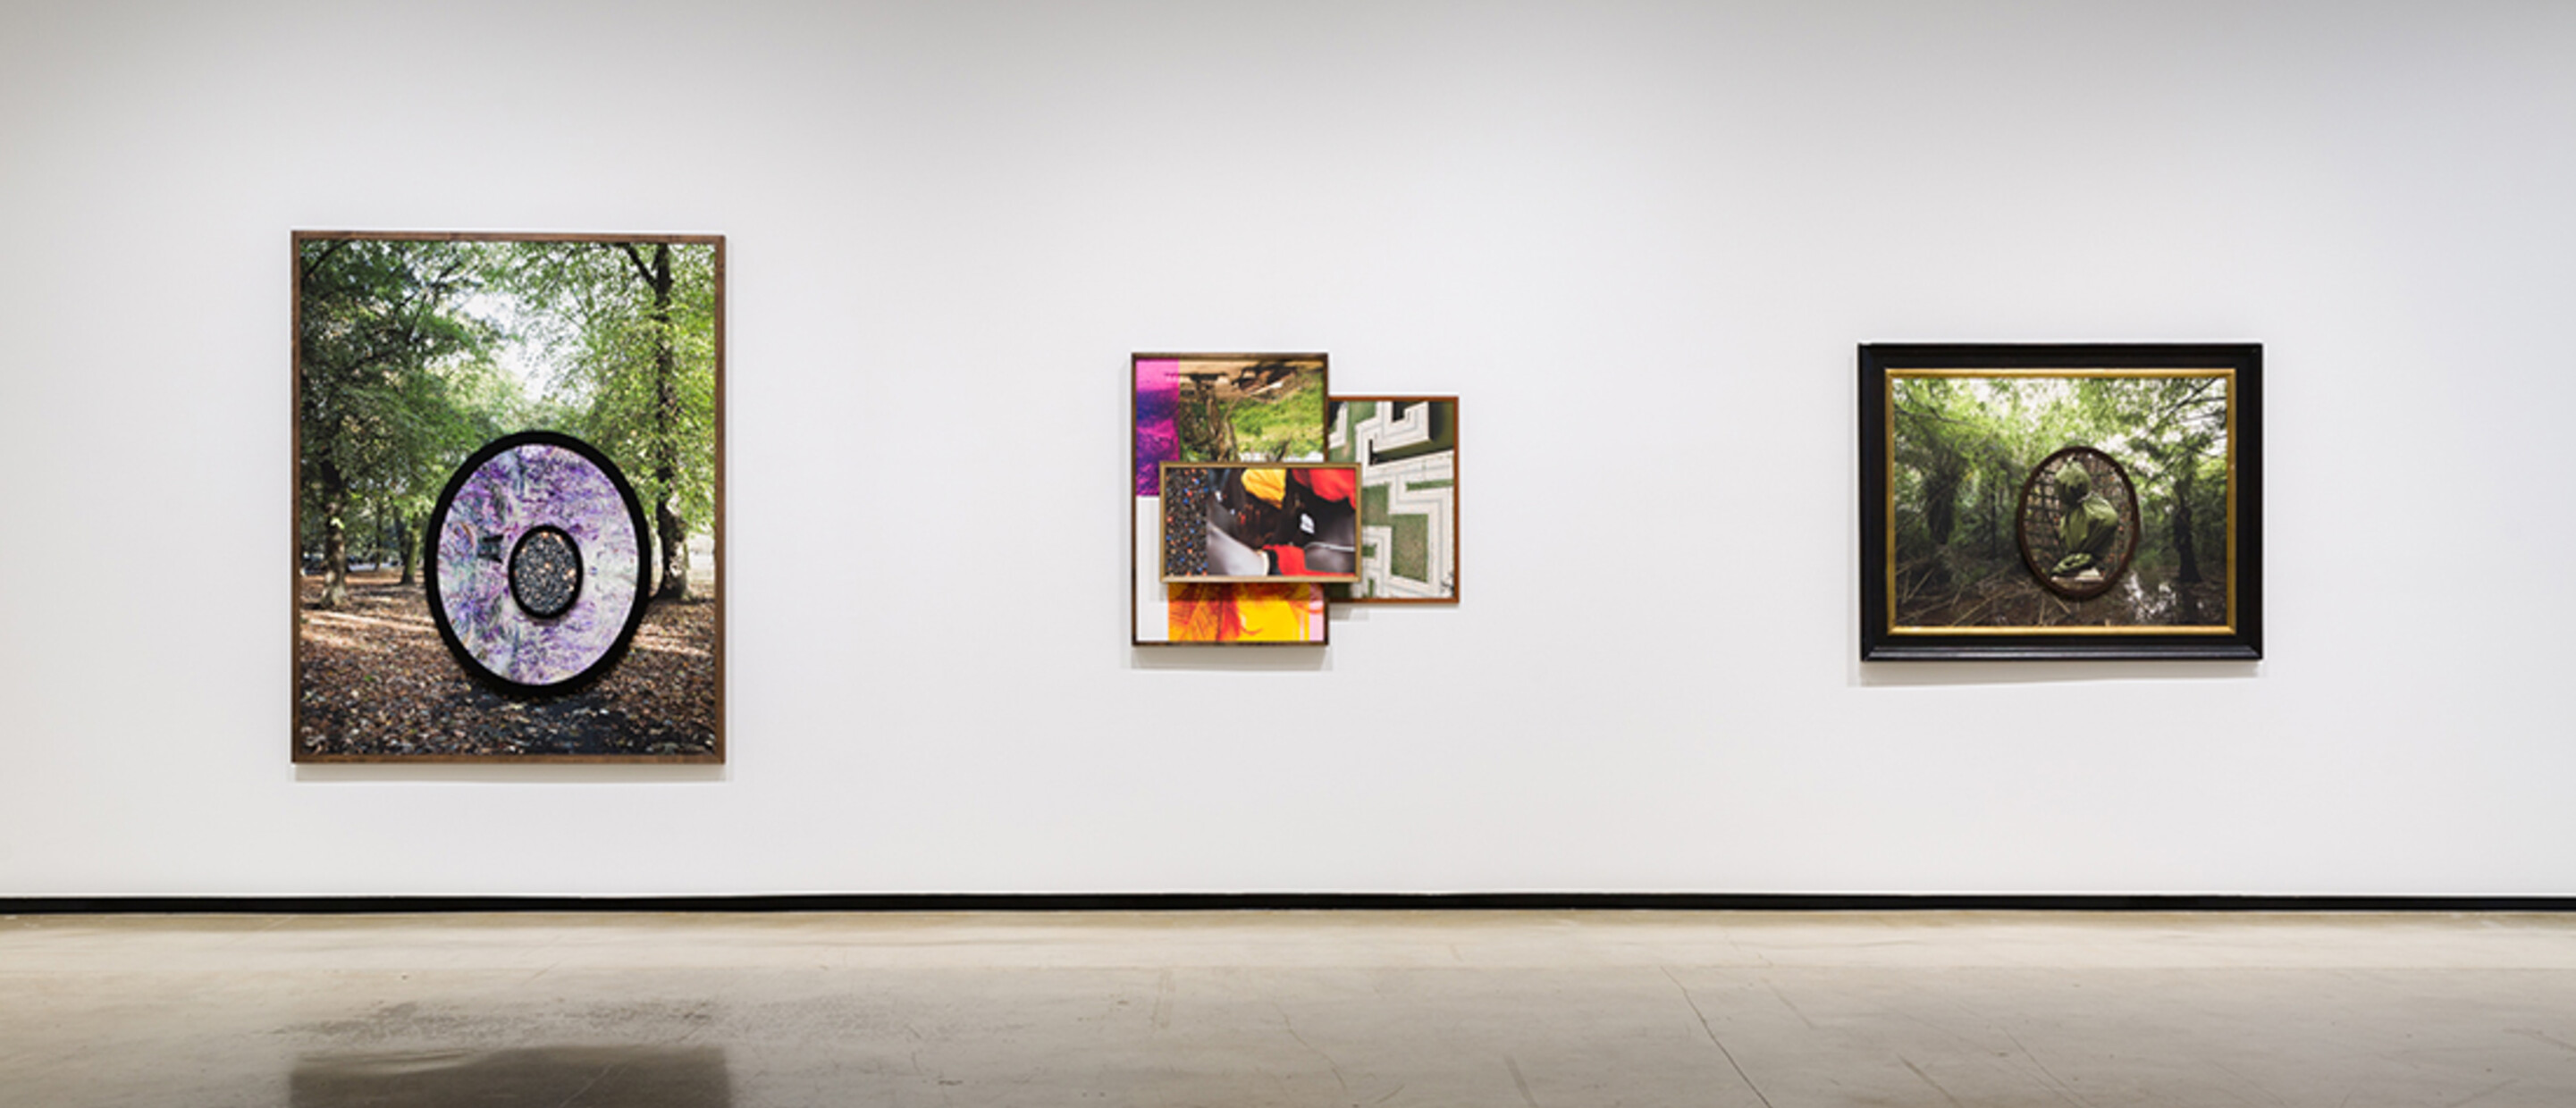 Installation view of exhibition with composite photographs mounted on walls